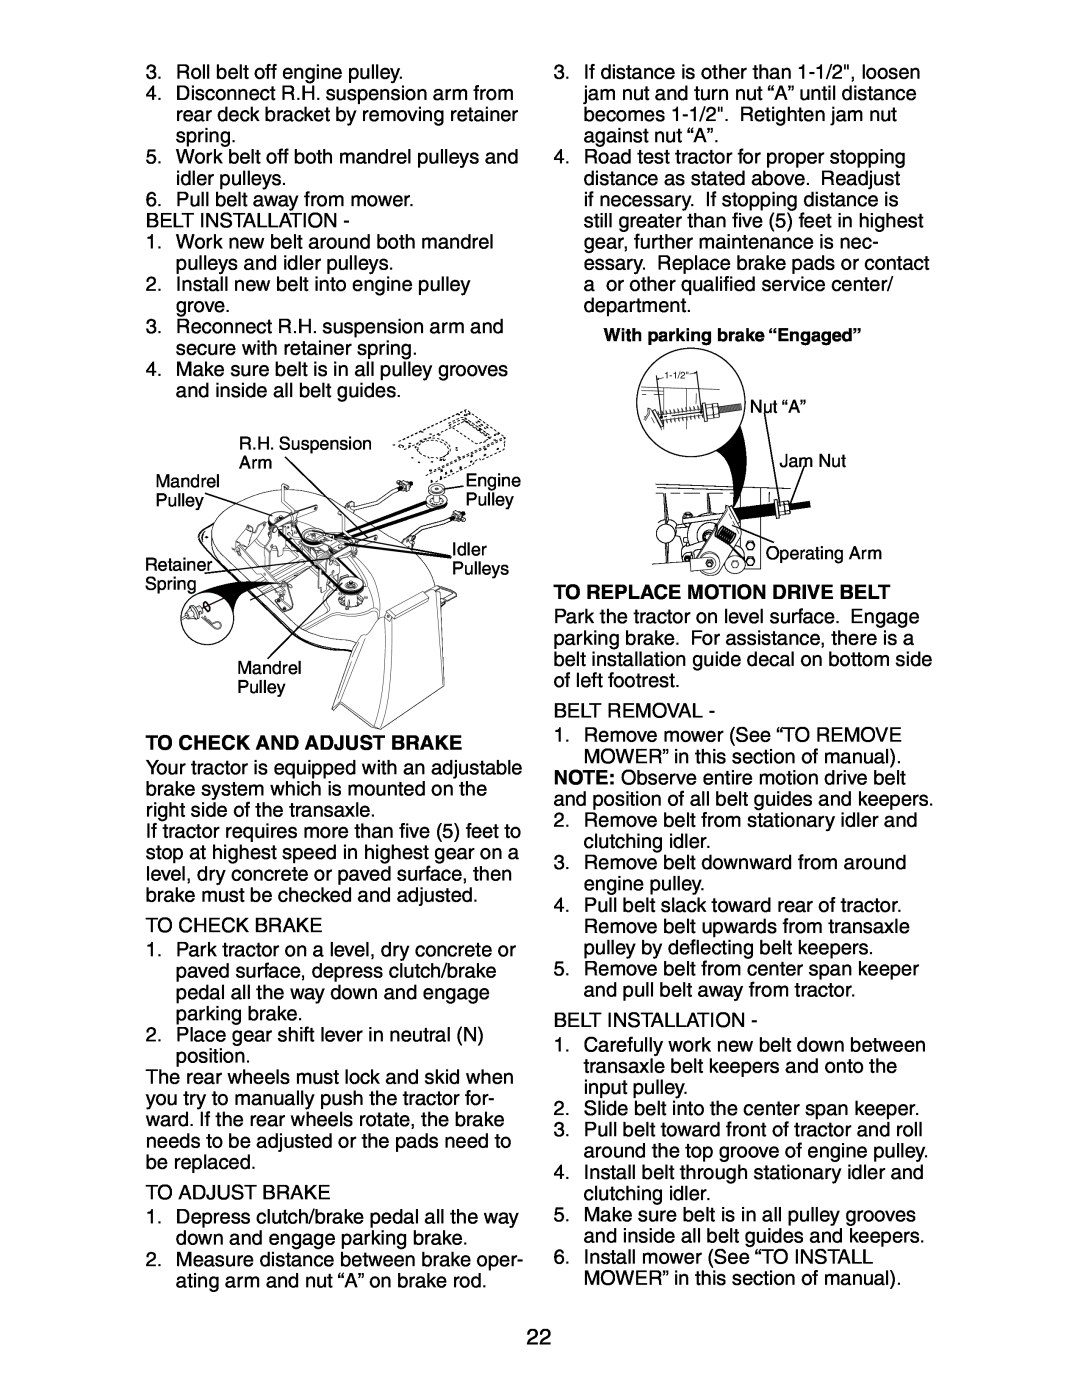 Poulan 271150 manual To Check And Adjust Brake, To Replace Motion Drive Belt 